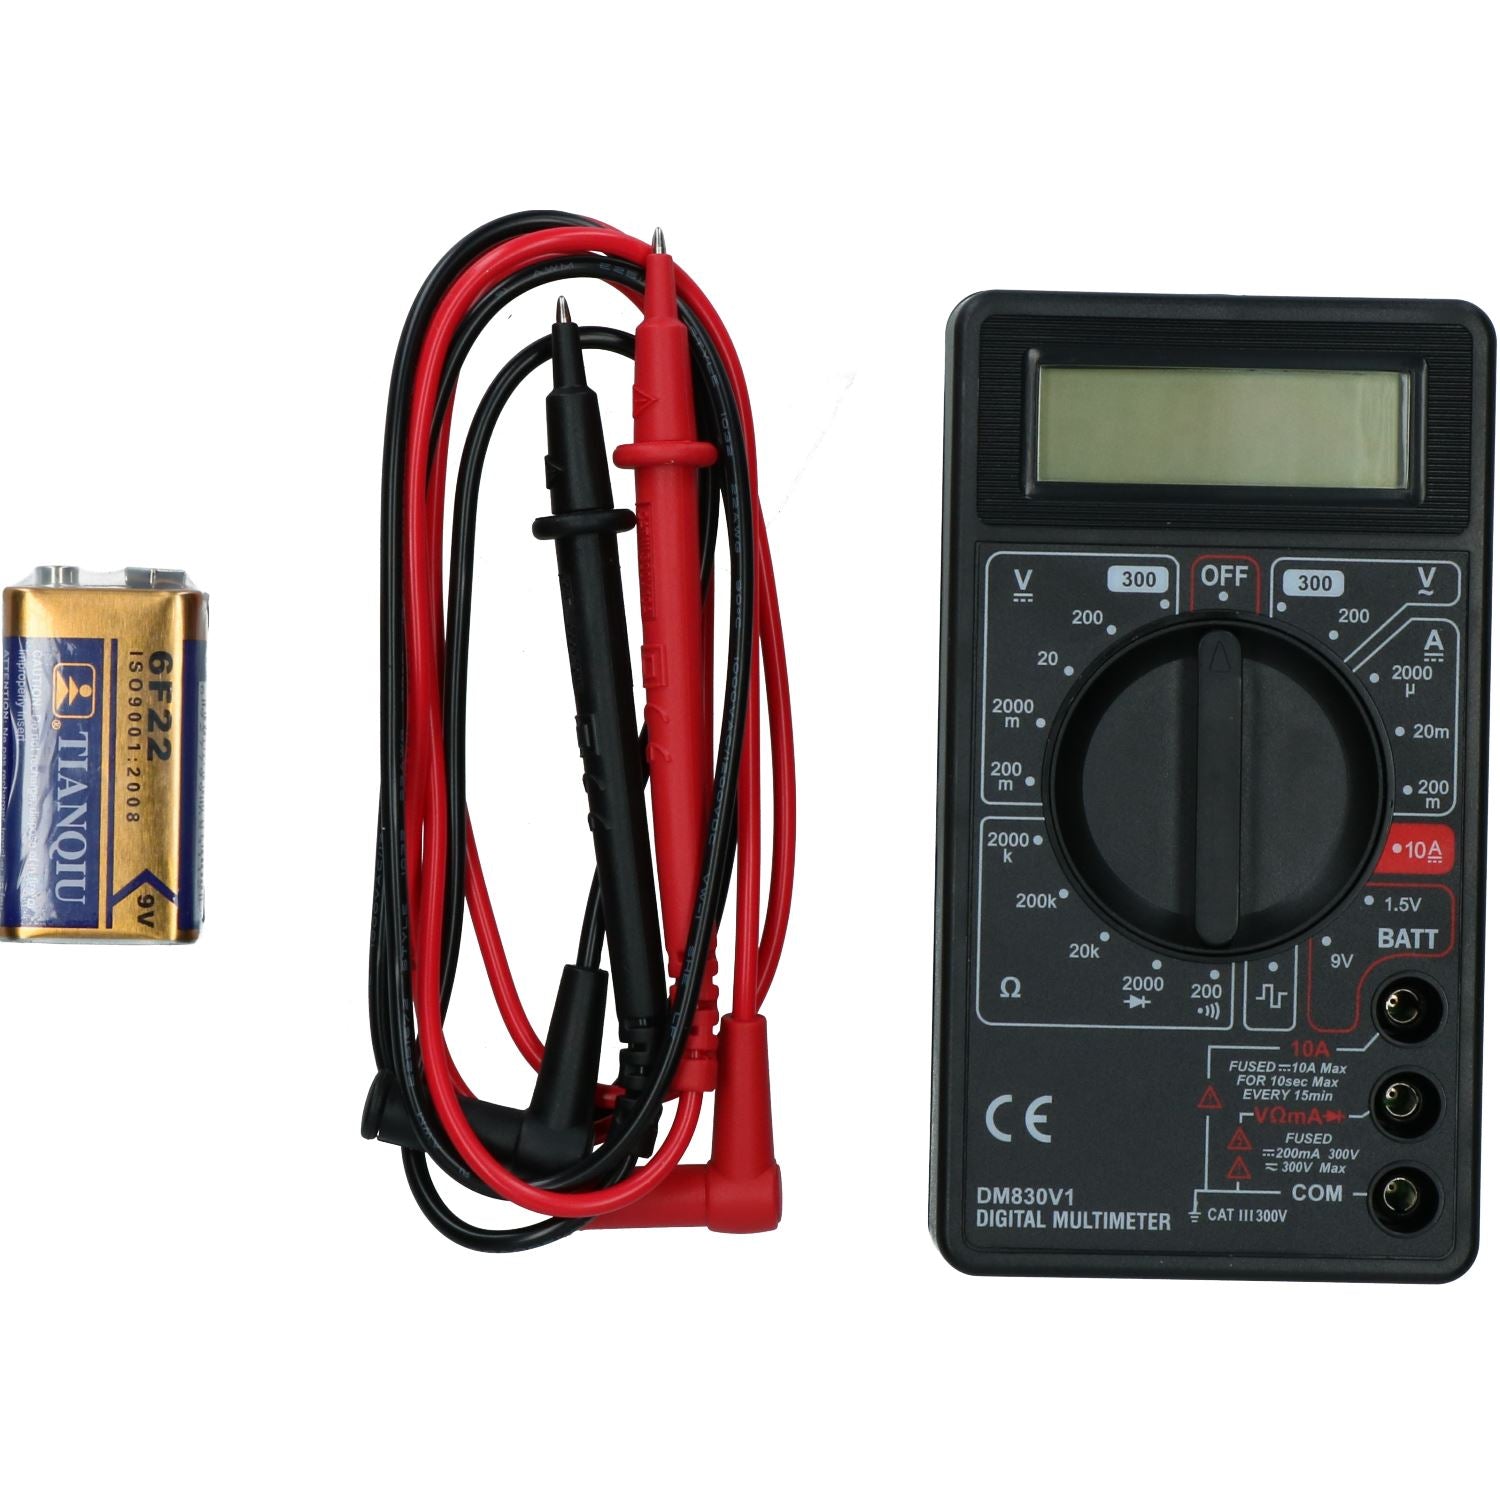 AC + DC Voltage Digital Multimeter Battery Current Tester with Large LCD Display